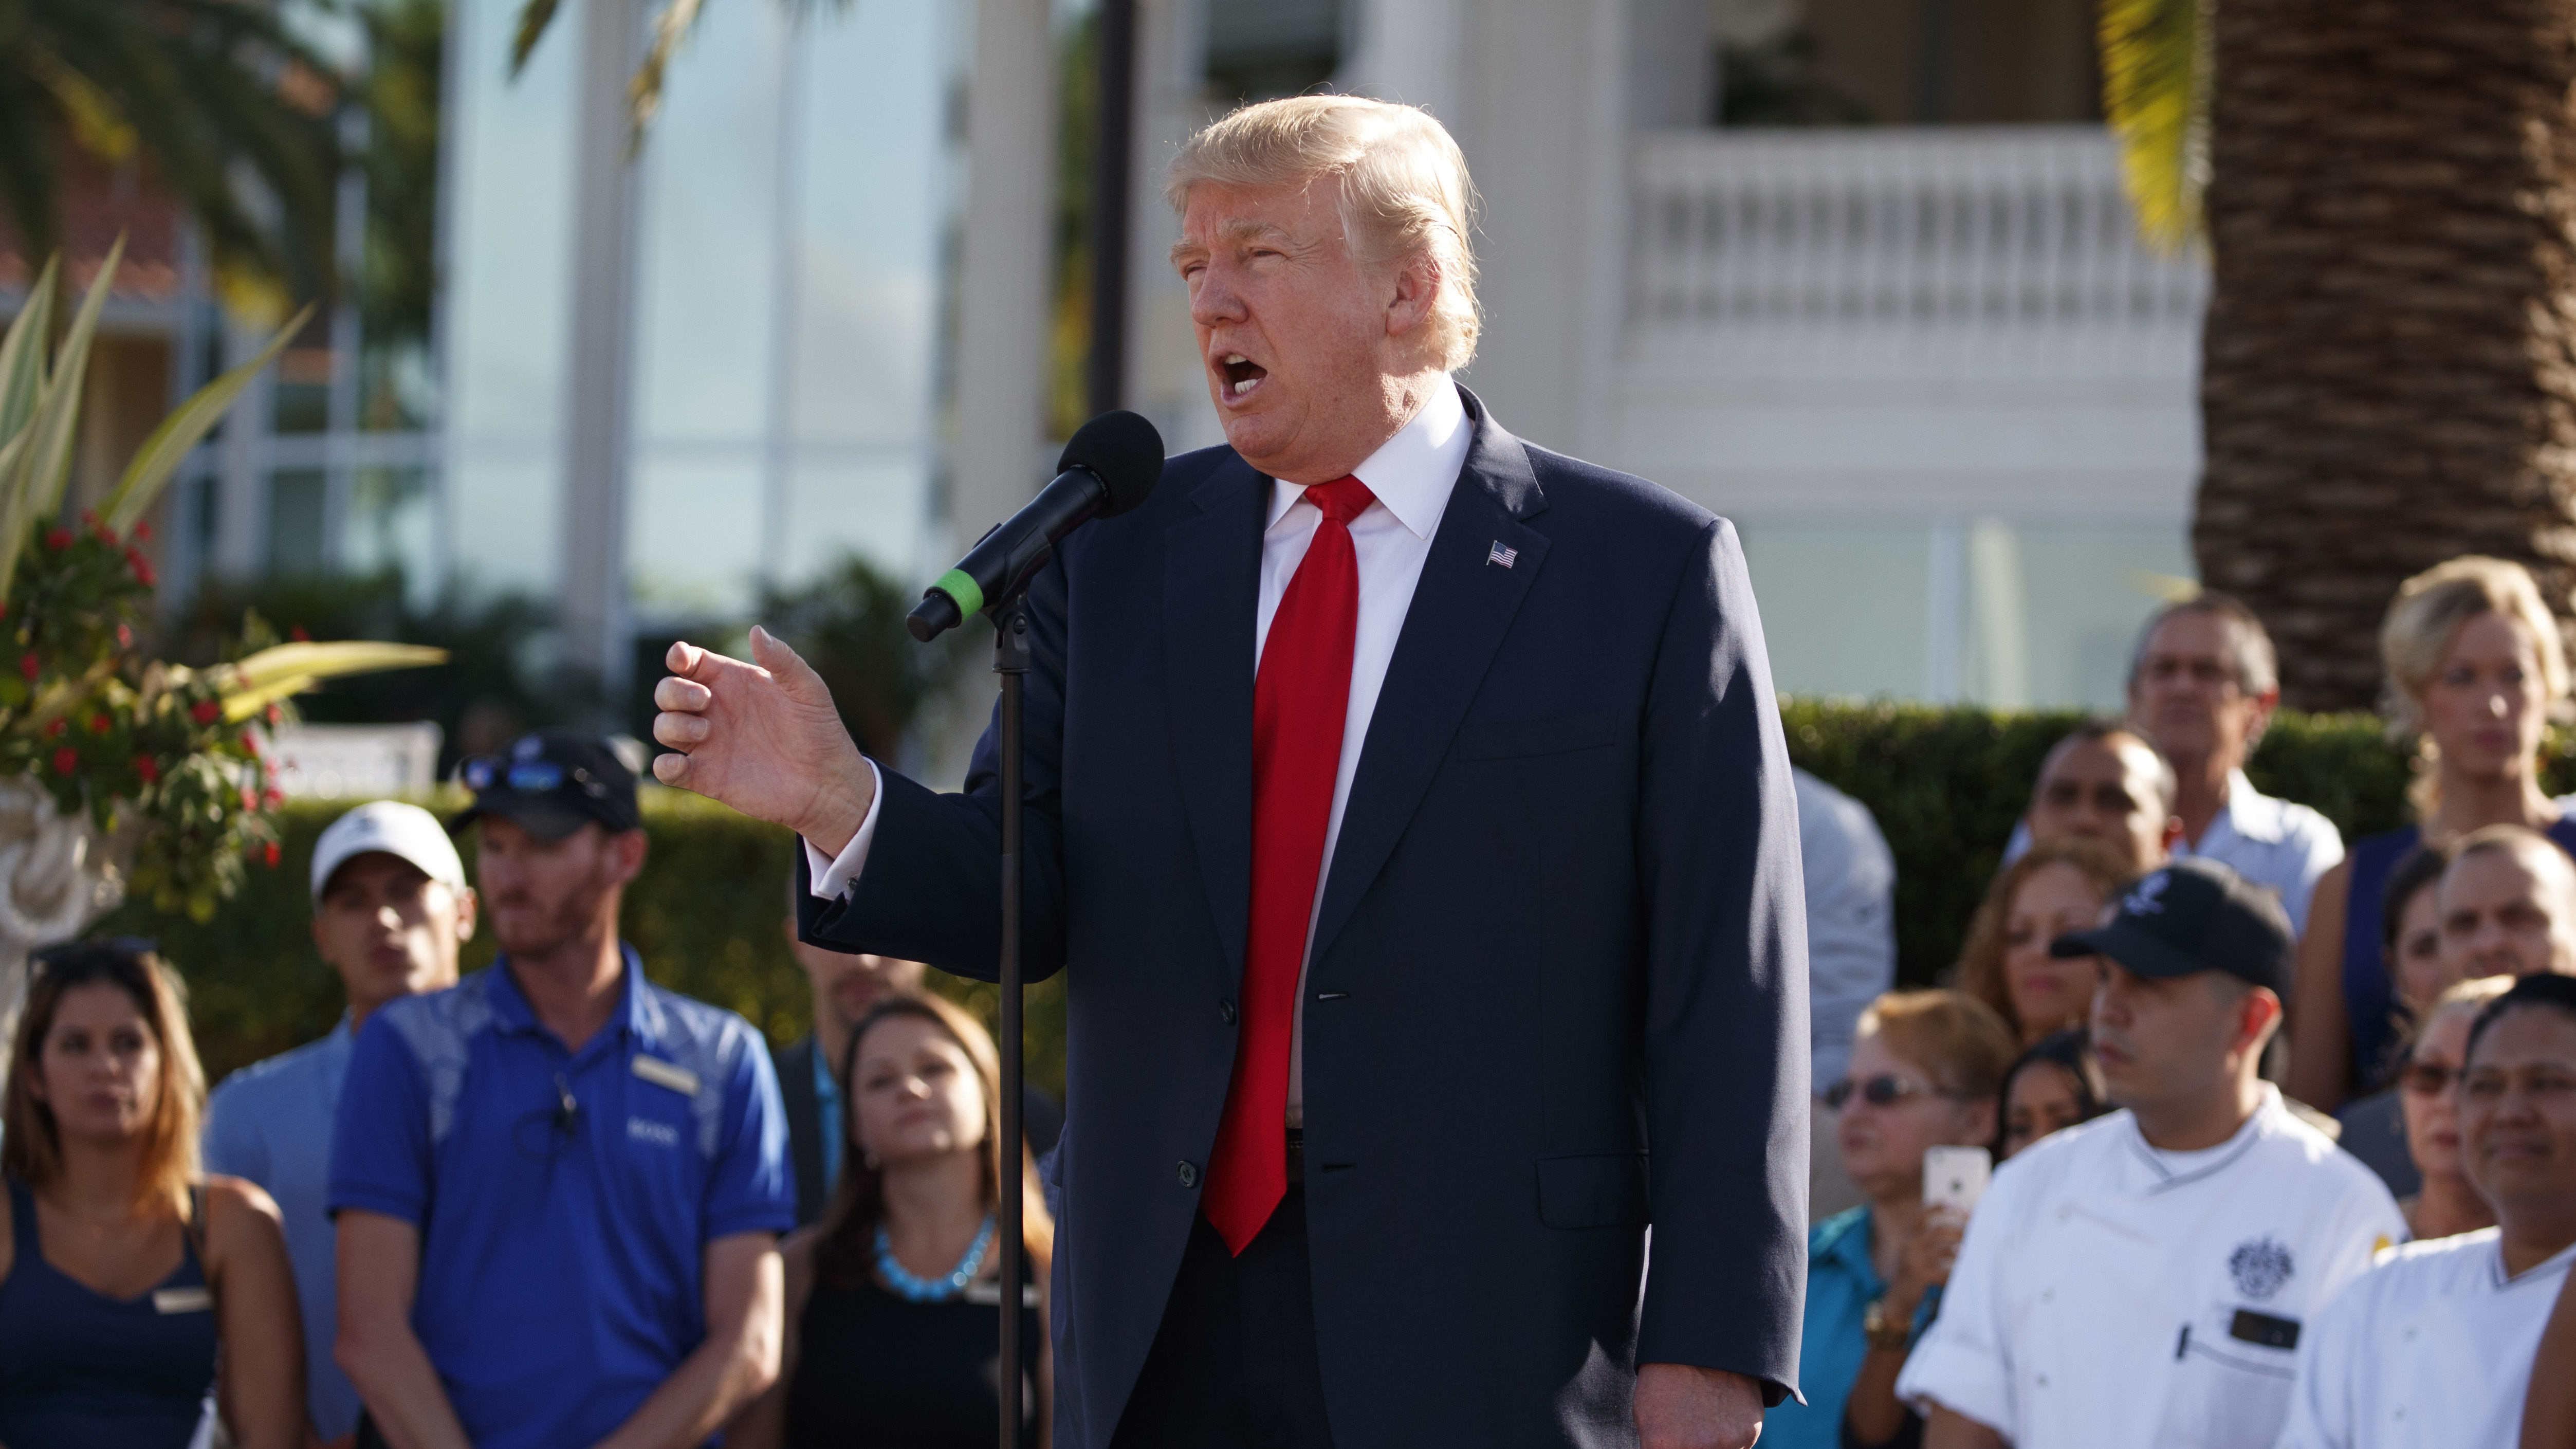 Trump speaks at his National Doral golf club in Florida. He repeatedly showcased his properties and hotels throughout the presidential campaign. 